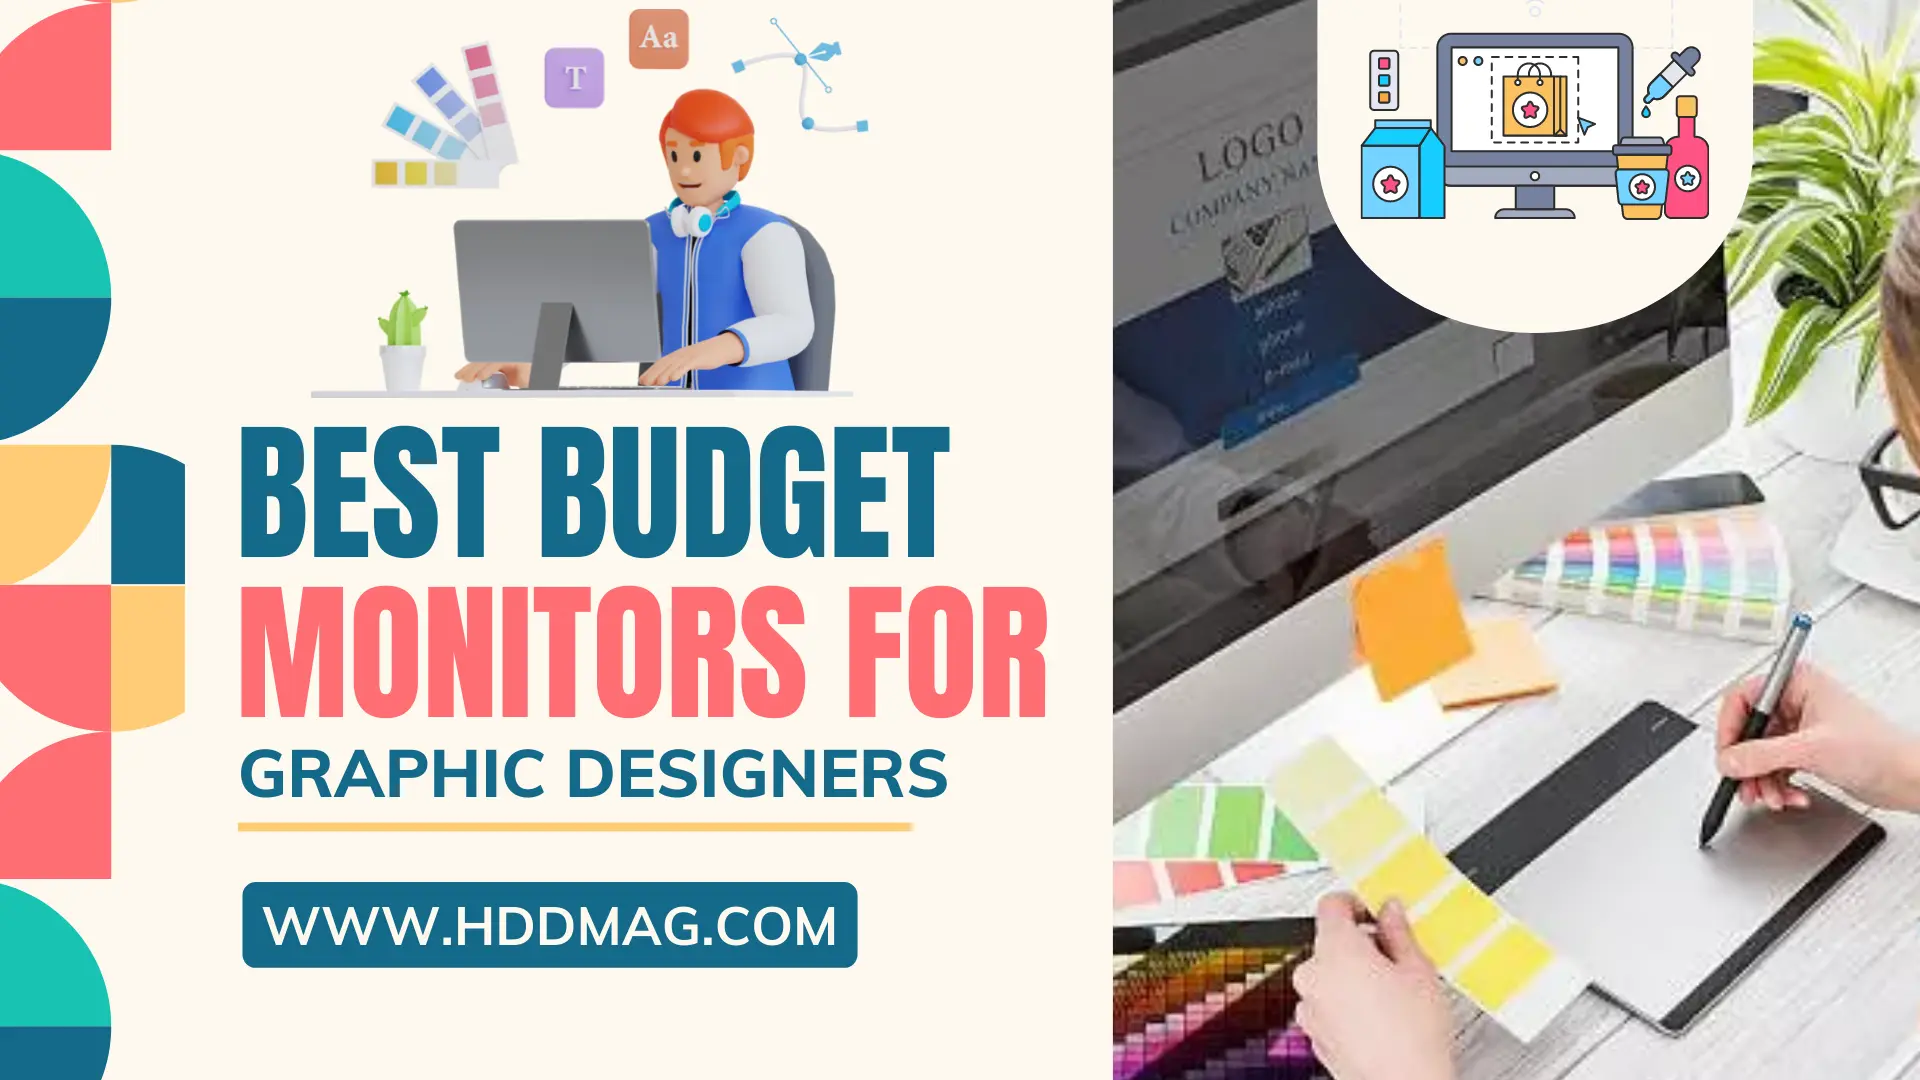 Best Budget Monitors for Graphic Designers